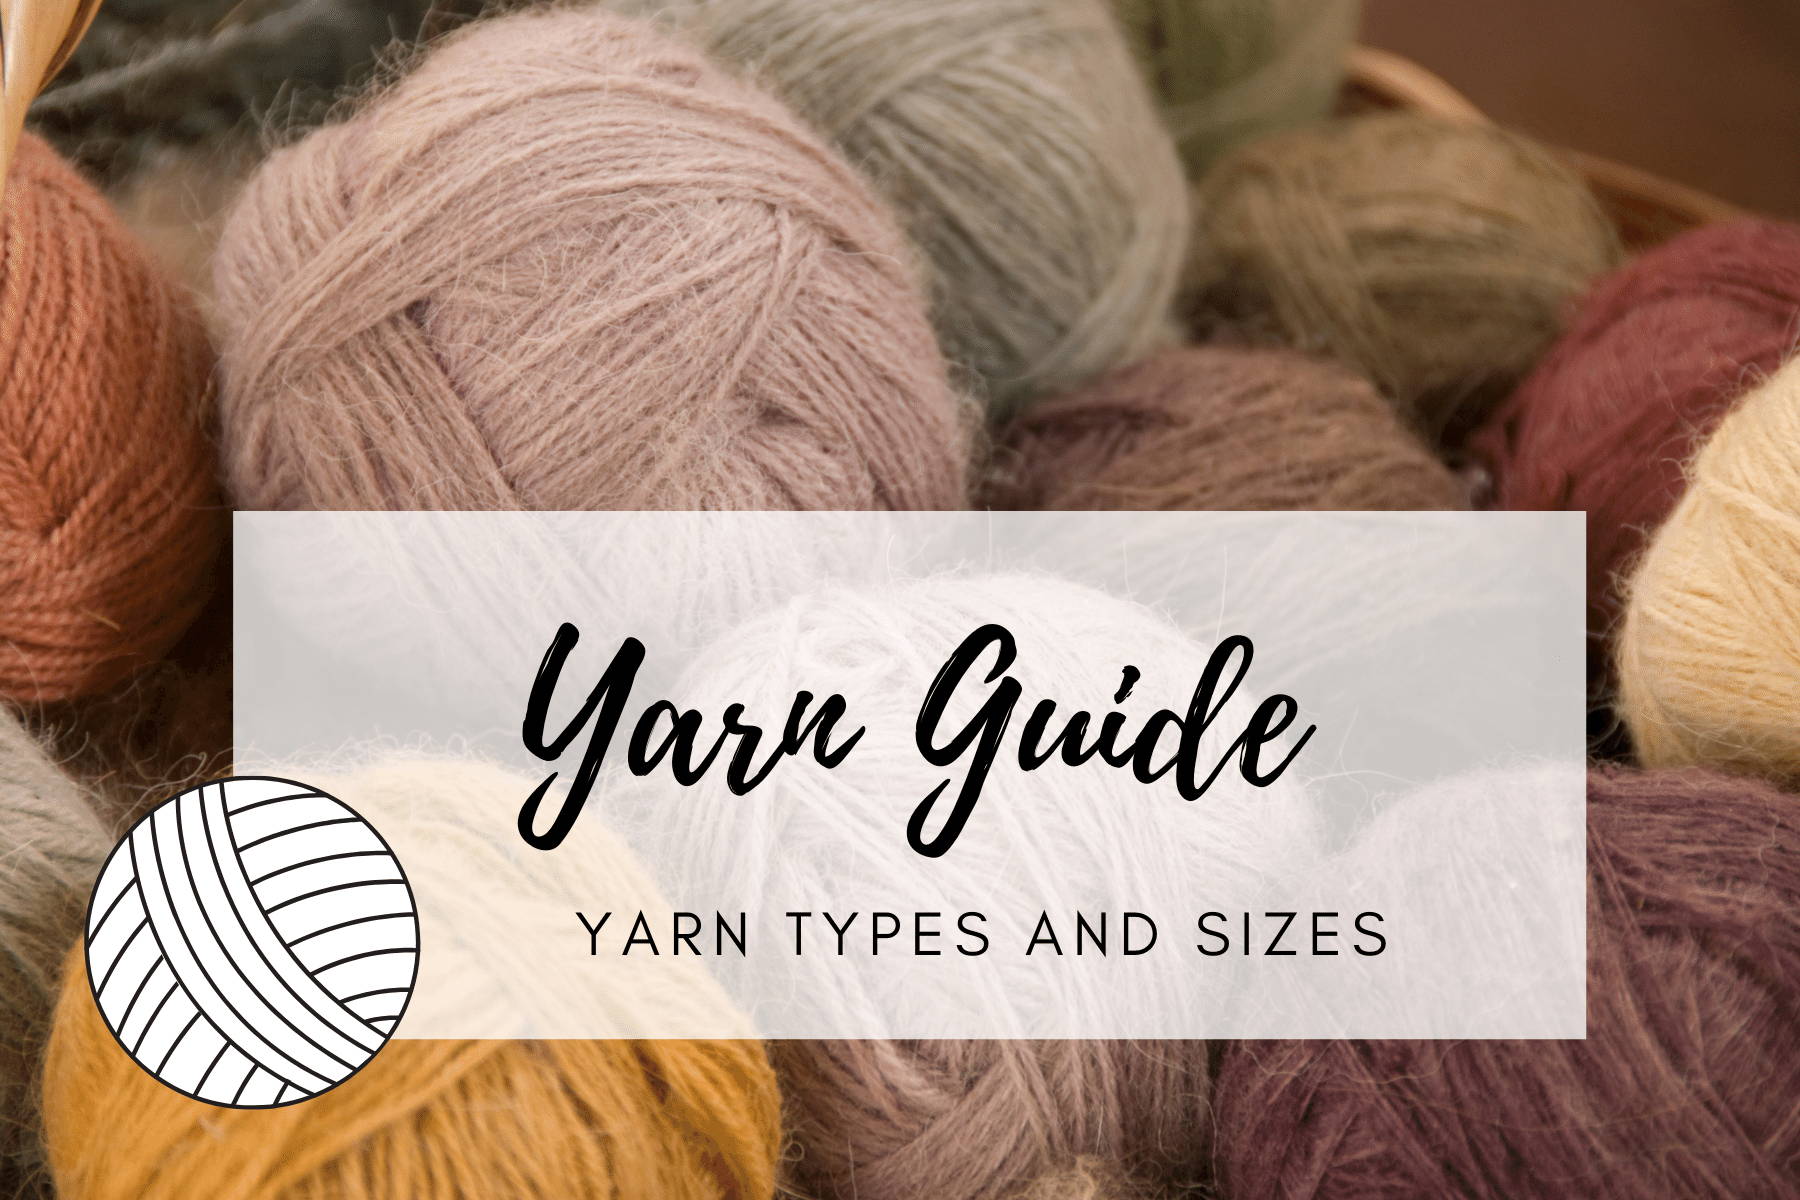 Yarn Weights Explained + A Quick Reference Guide! - Off the Beaten Hook